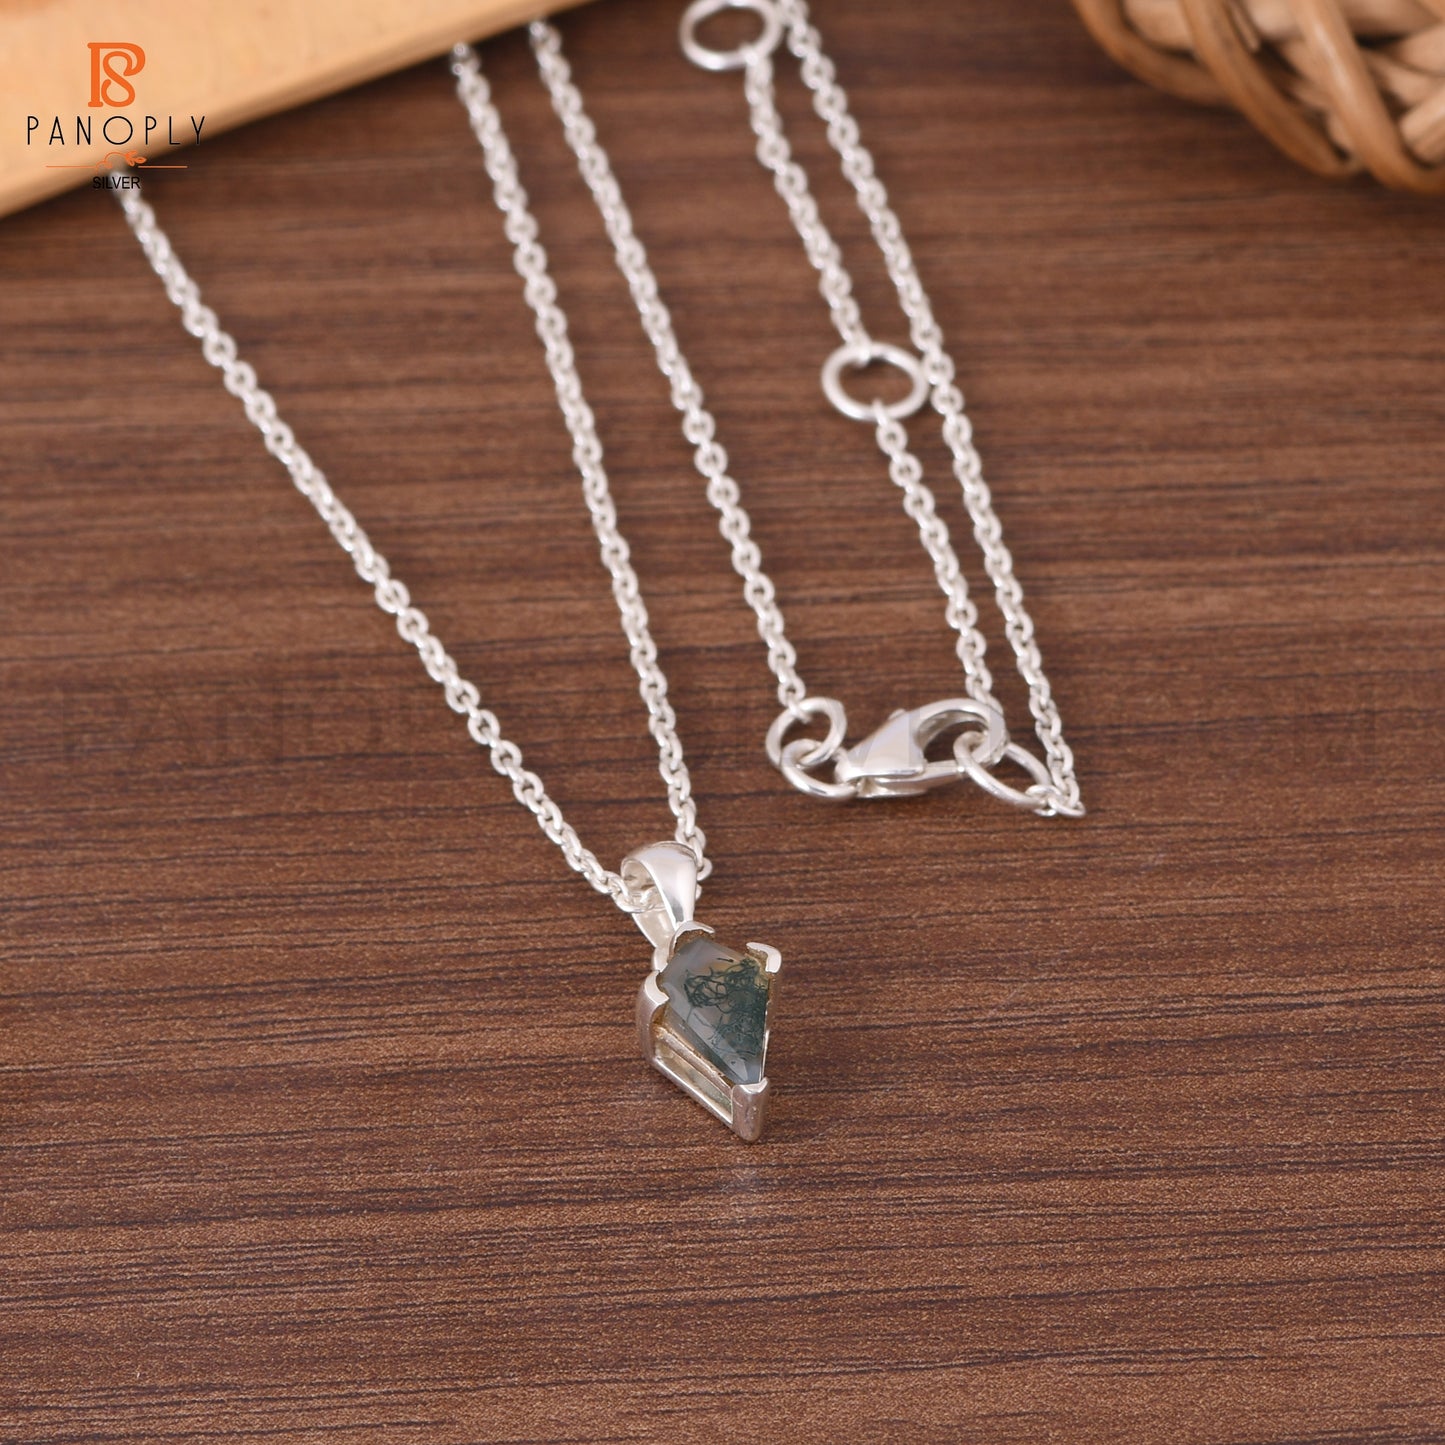 Moss Agate 925 Quality Silver Plated Kite Pendant